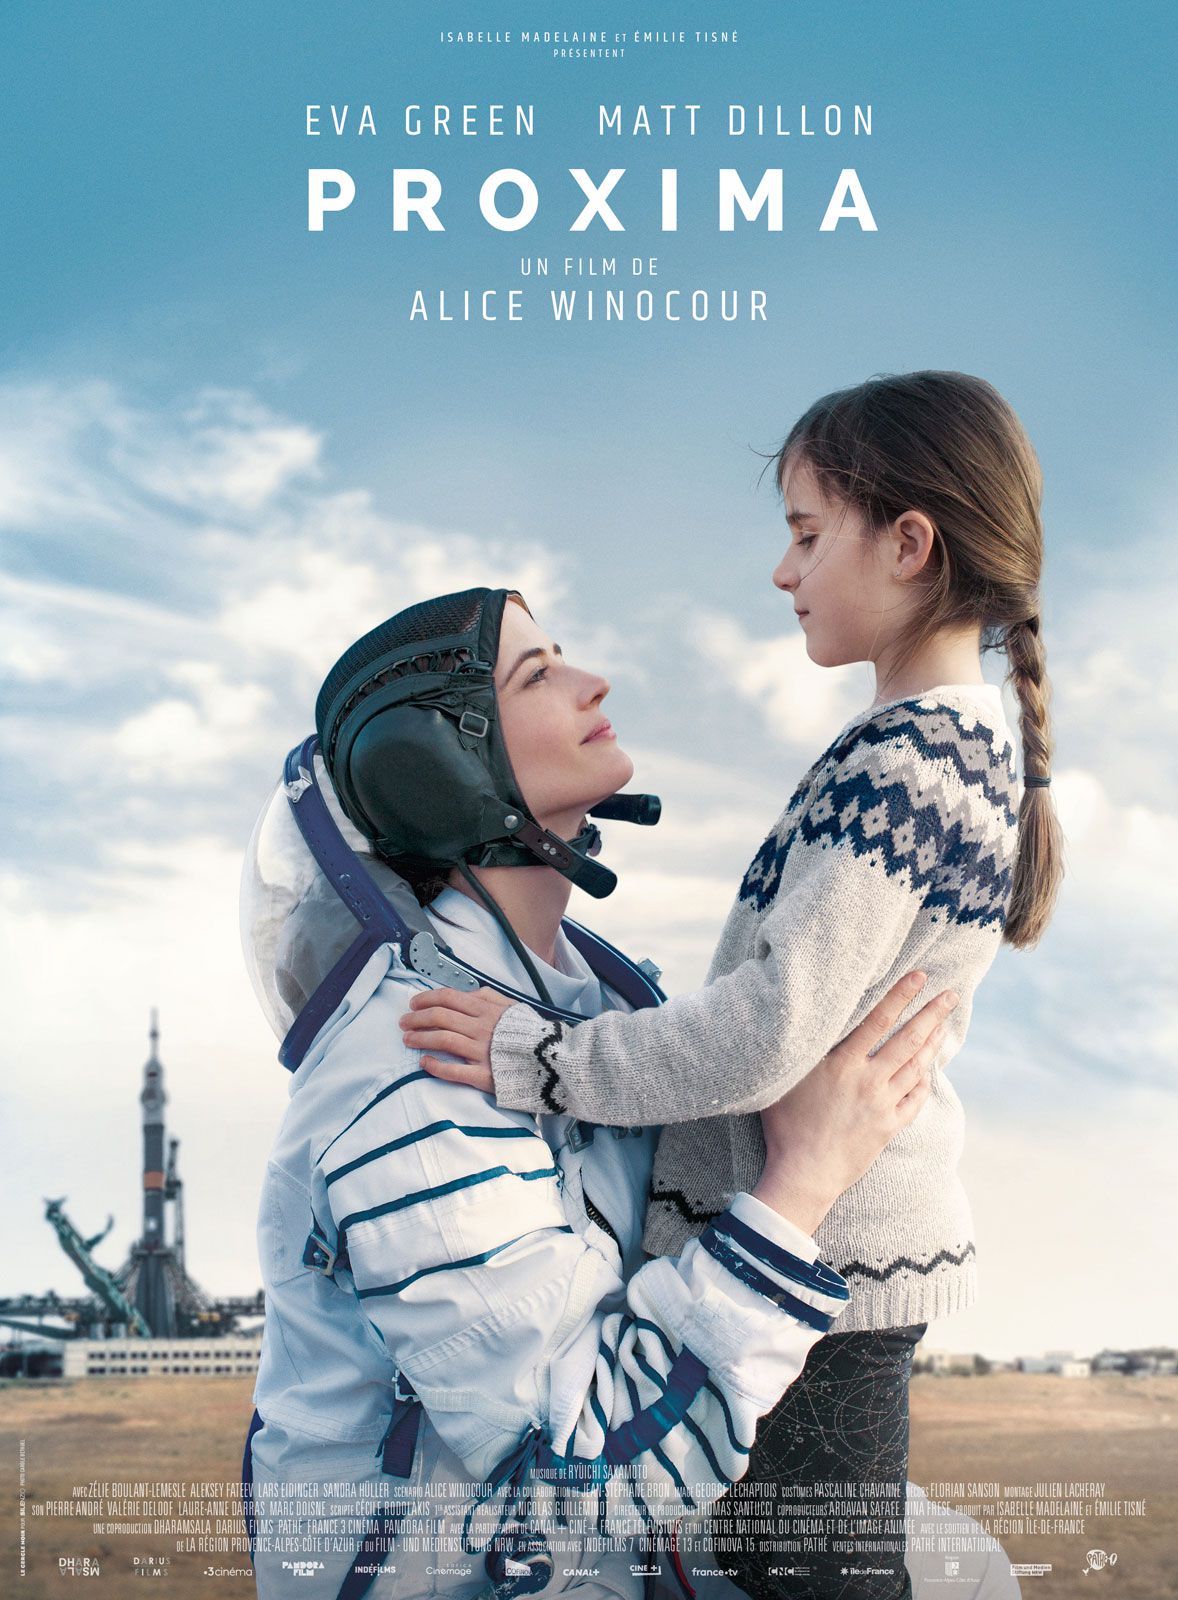 Proxima - Film (2019) streaming VF gratuit complet